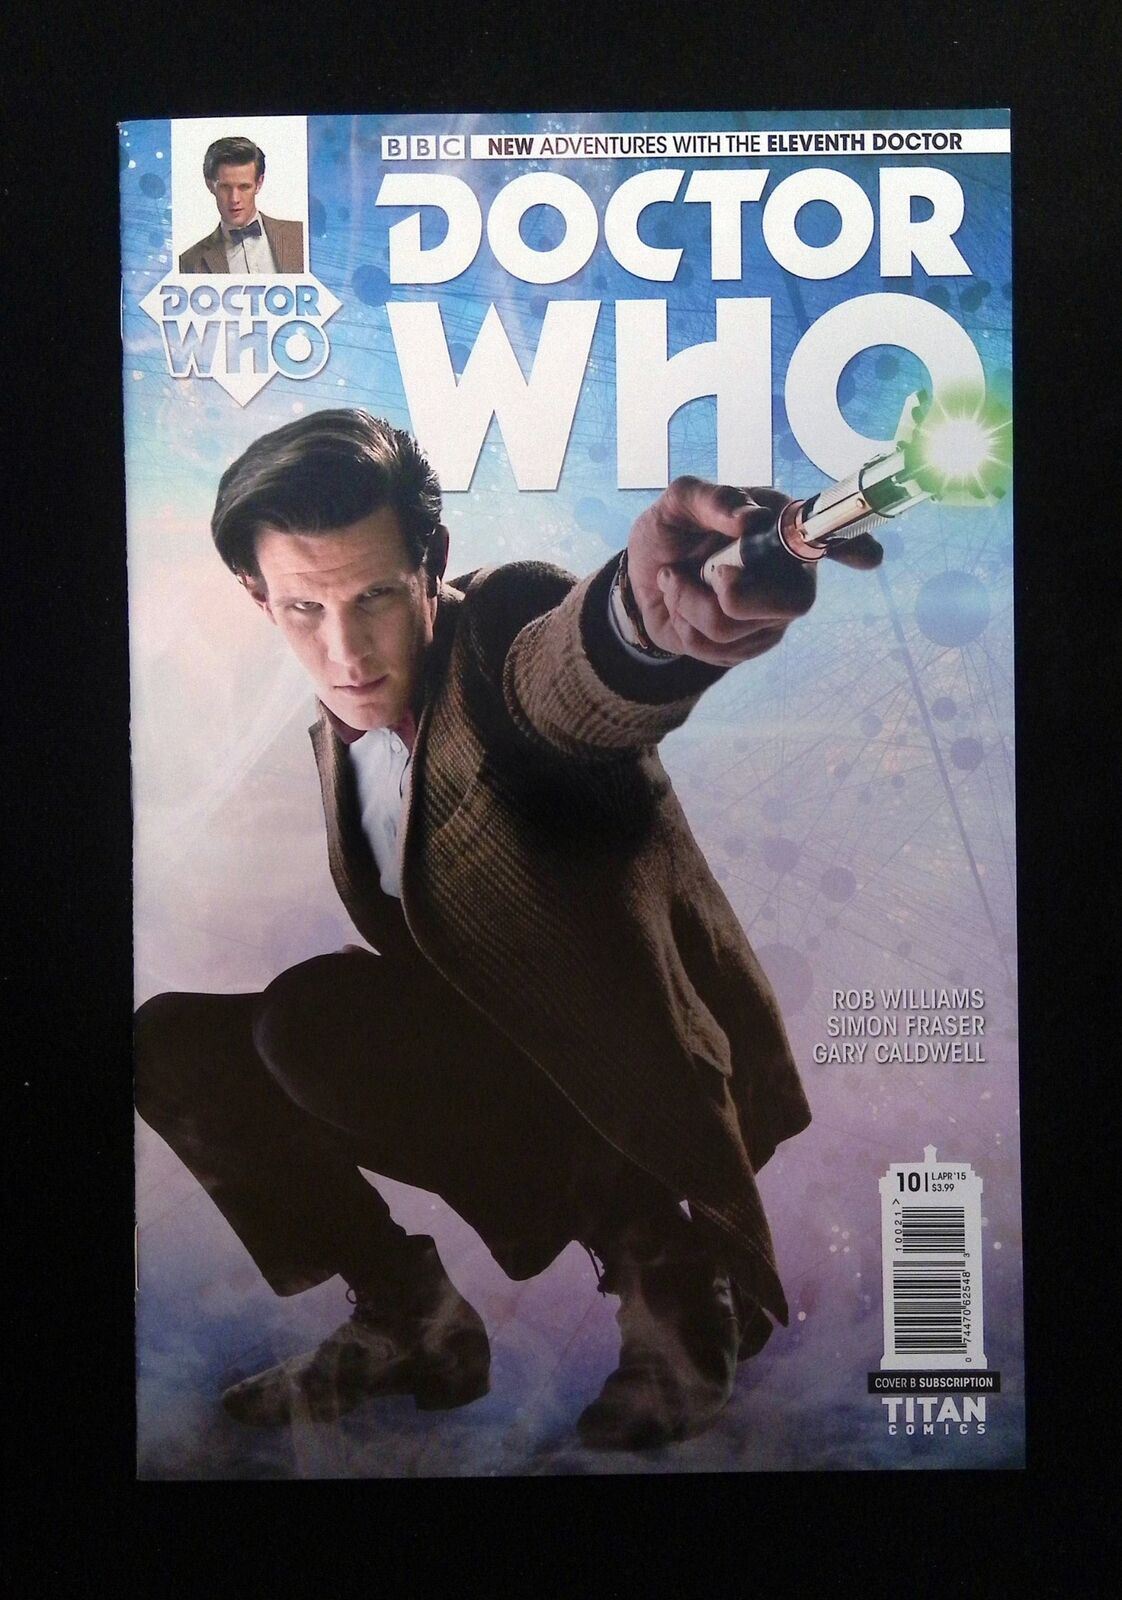 DOCTOR WHO THE ELEVENTH DOCTOR #10B  TITAN COMICS 2015 NM-  VARIANT COVER